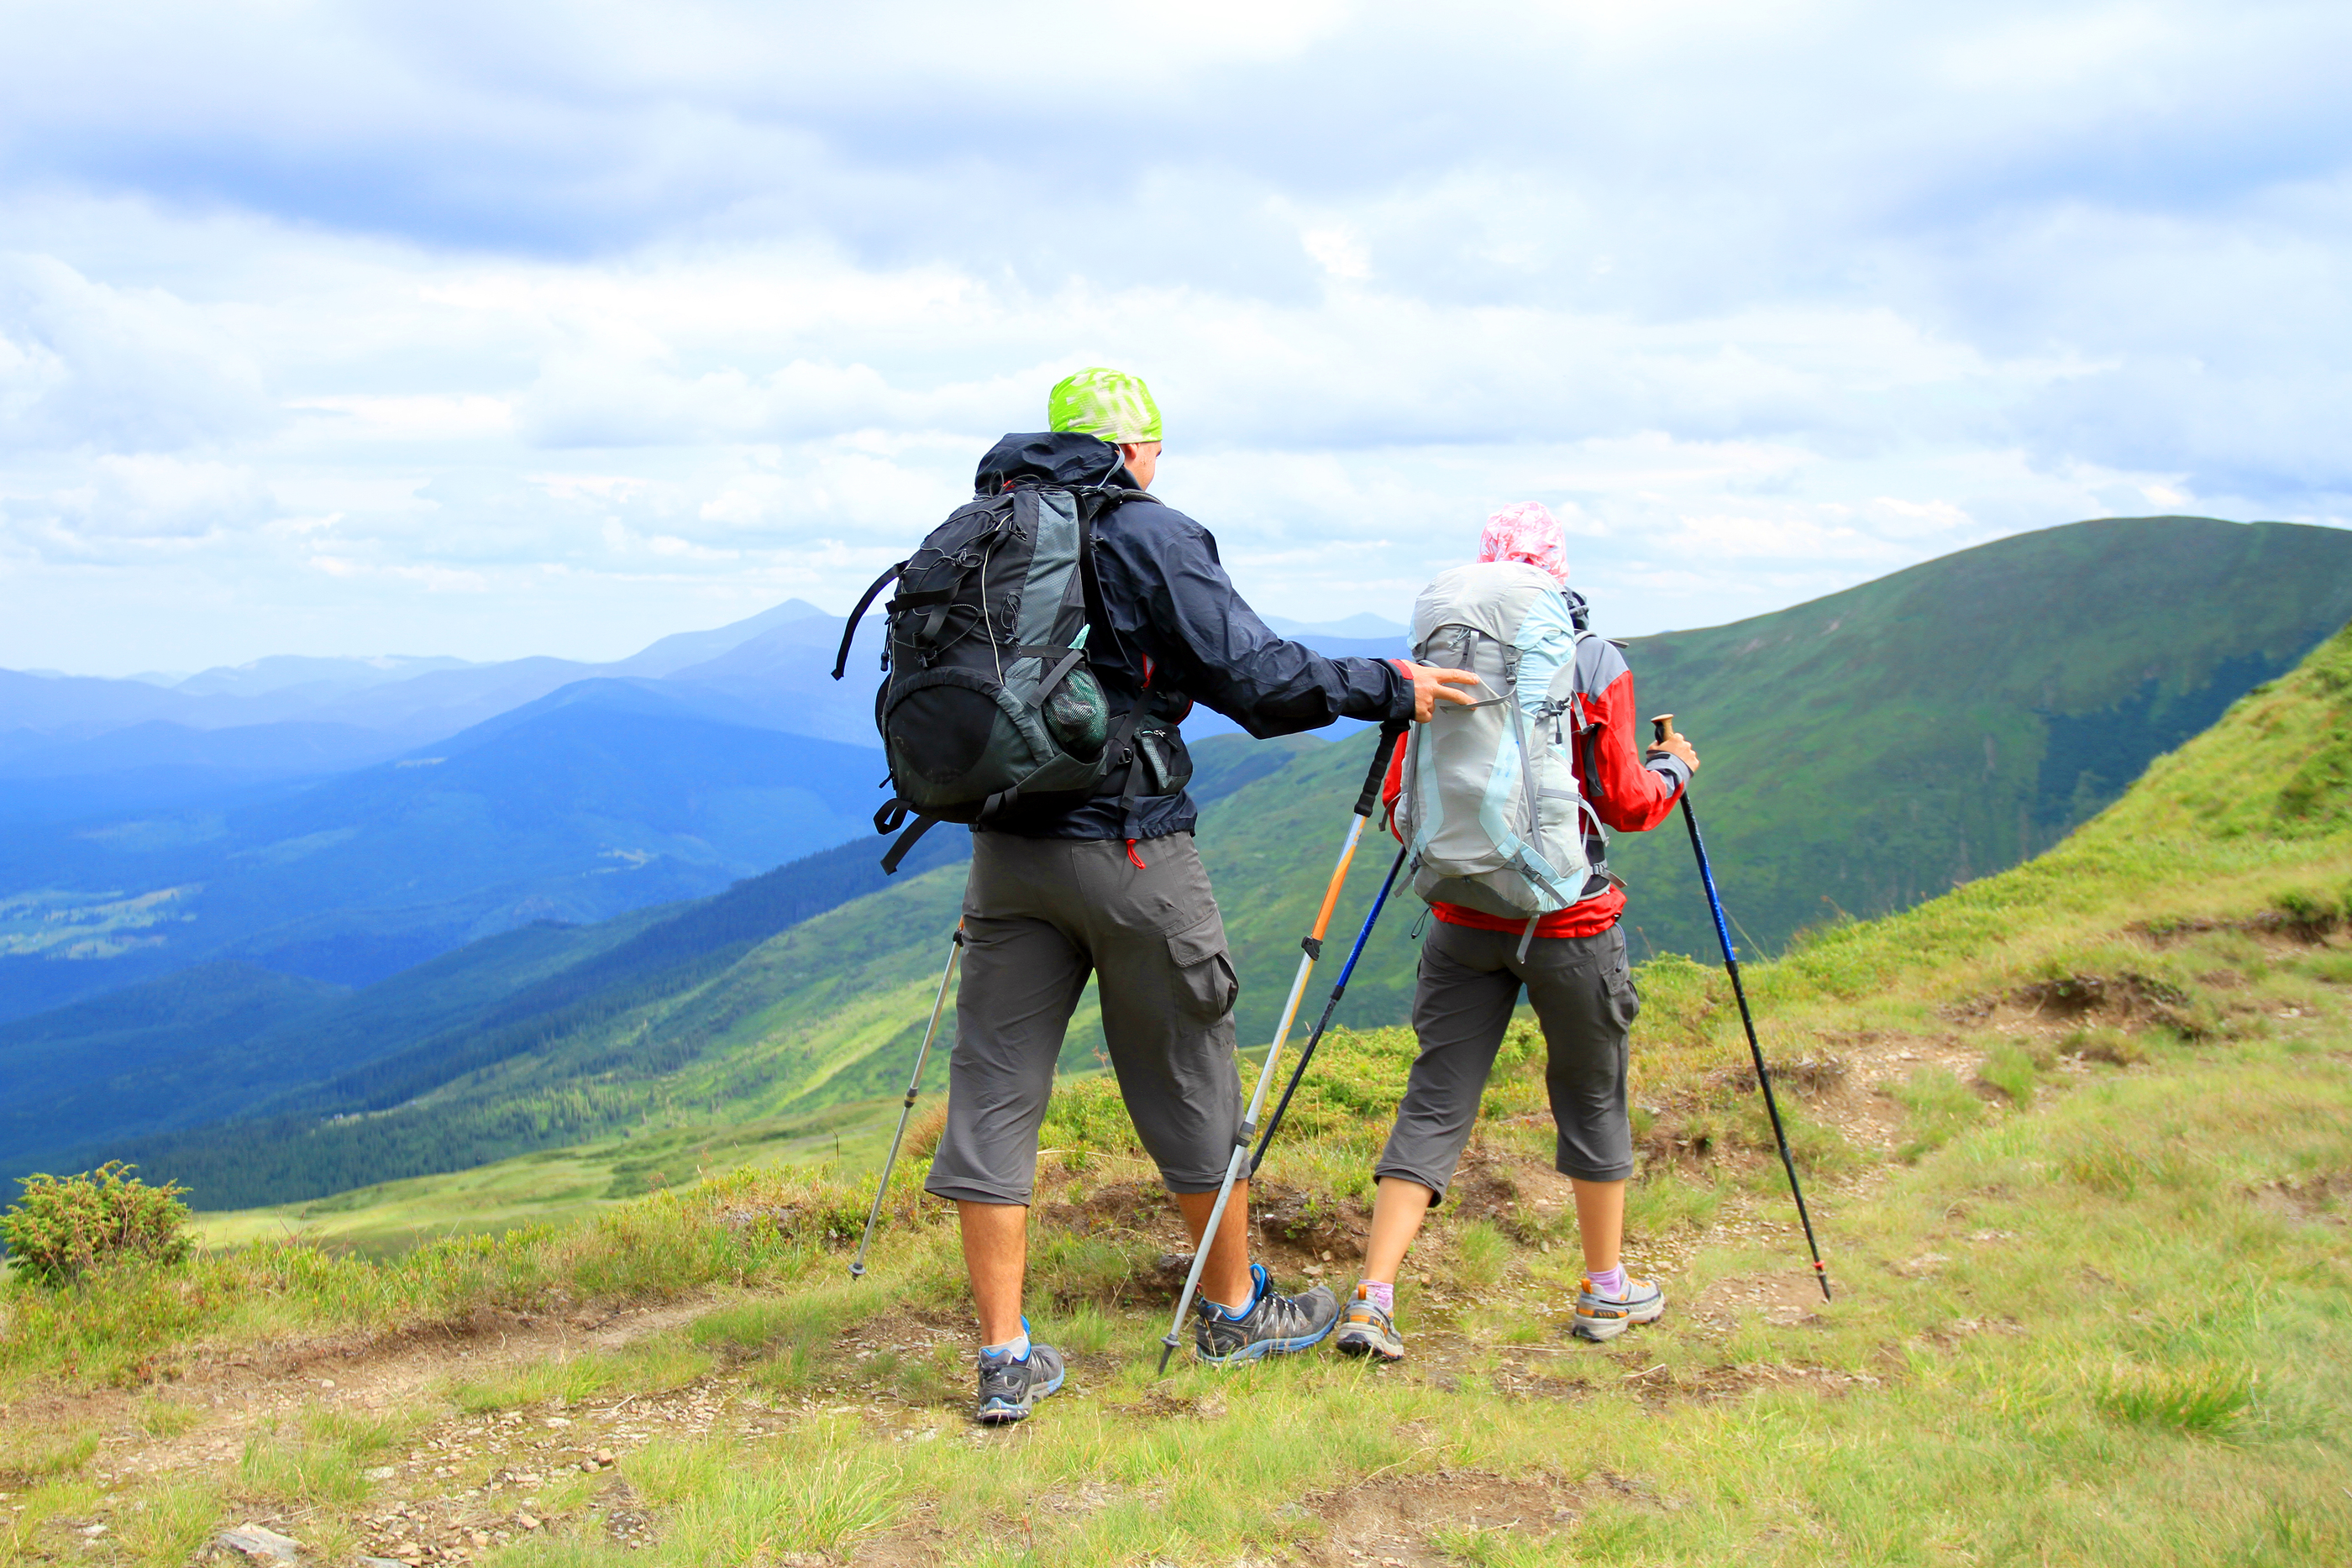 Summer hiking in the mountains.Hikers - people hiking, man looking at mountain nature landscape scenic with woman in background.